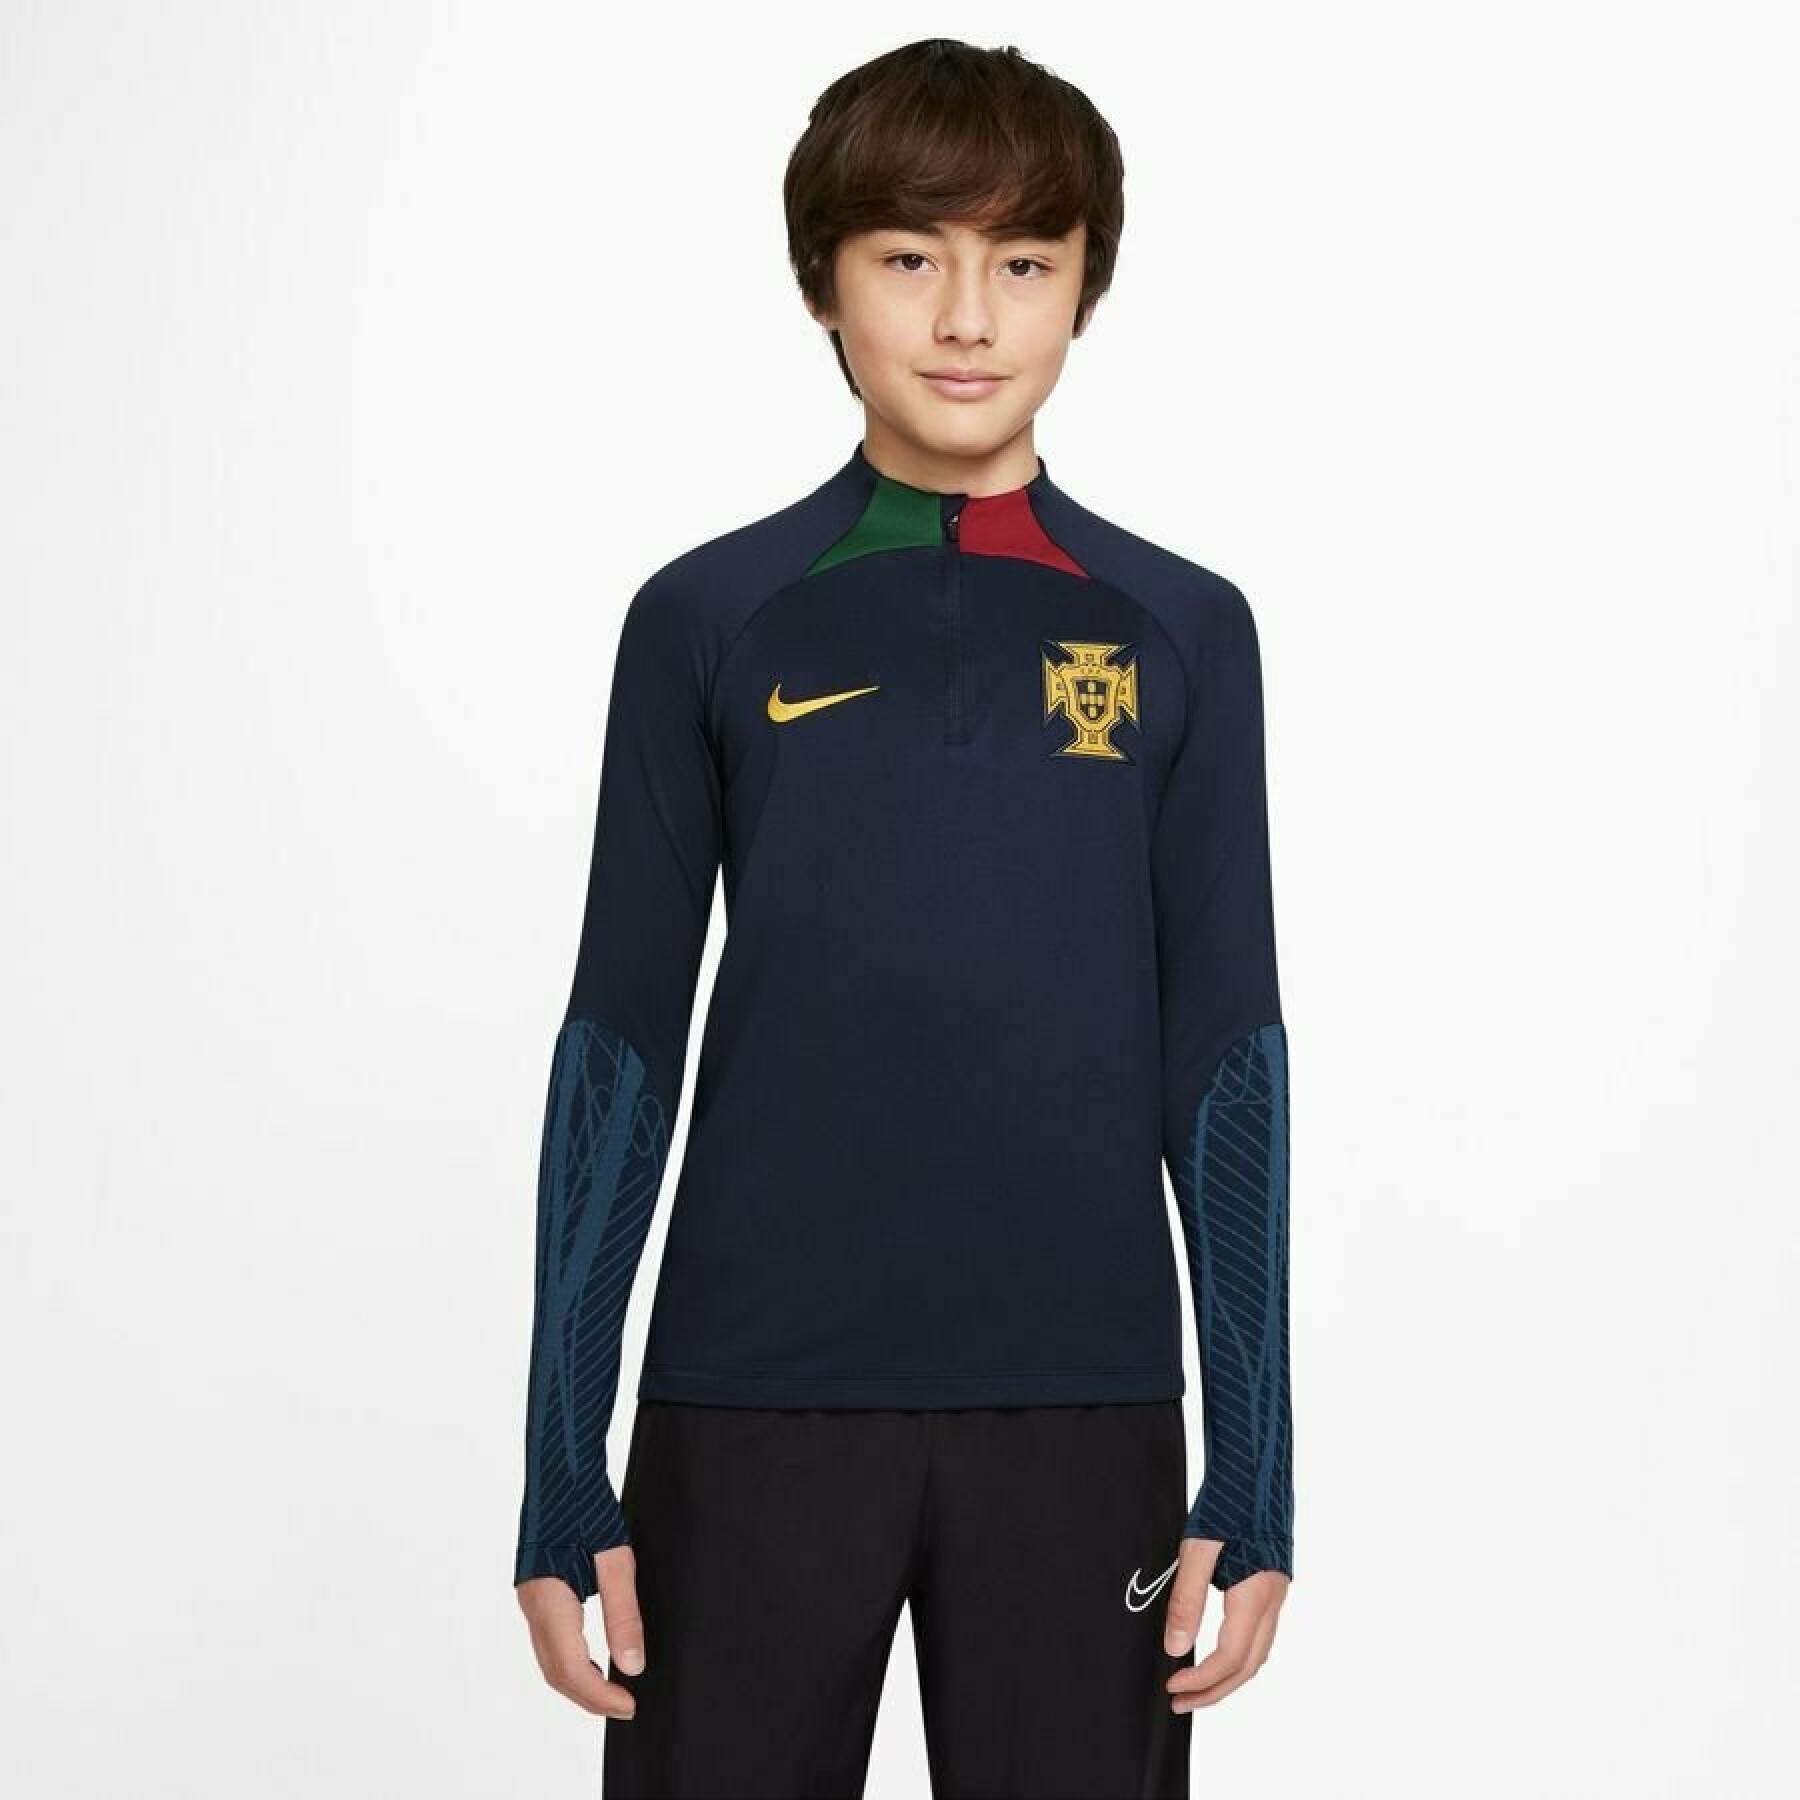 Children's World Cup 2022 training jersey Portugal